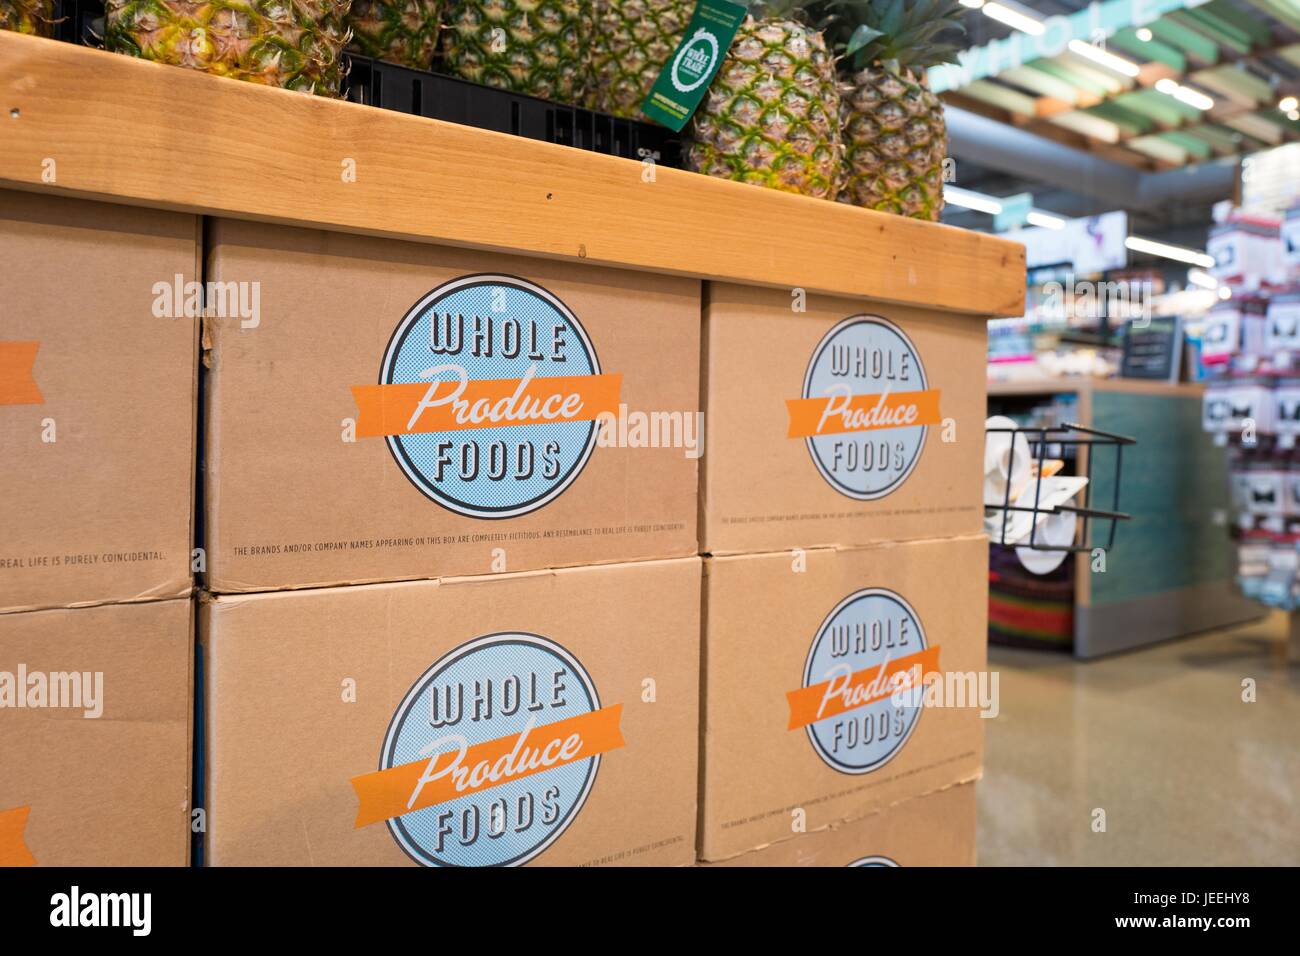 Signage advertises produce at the Whole Foods Market grocery store in Dublin, California, June 16, 2017. Stock Photo